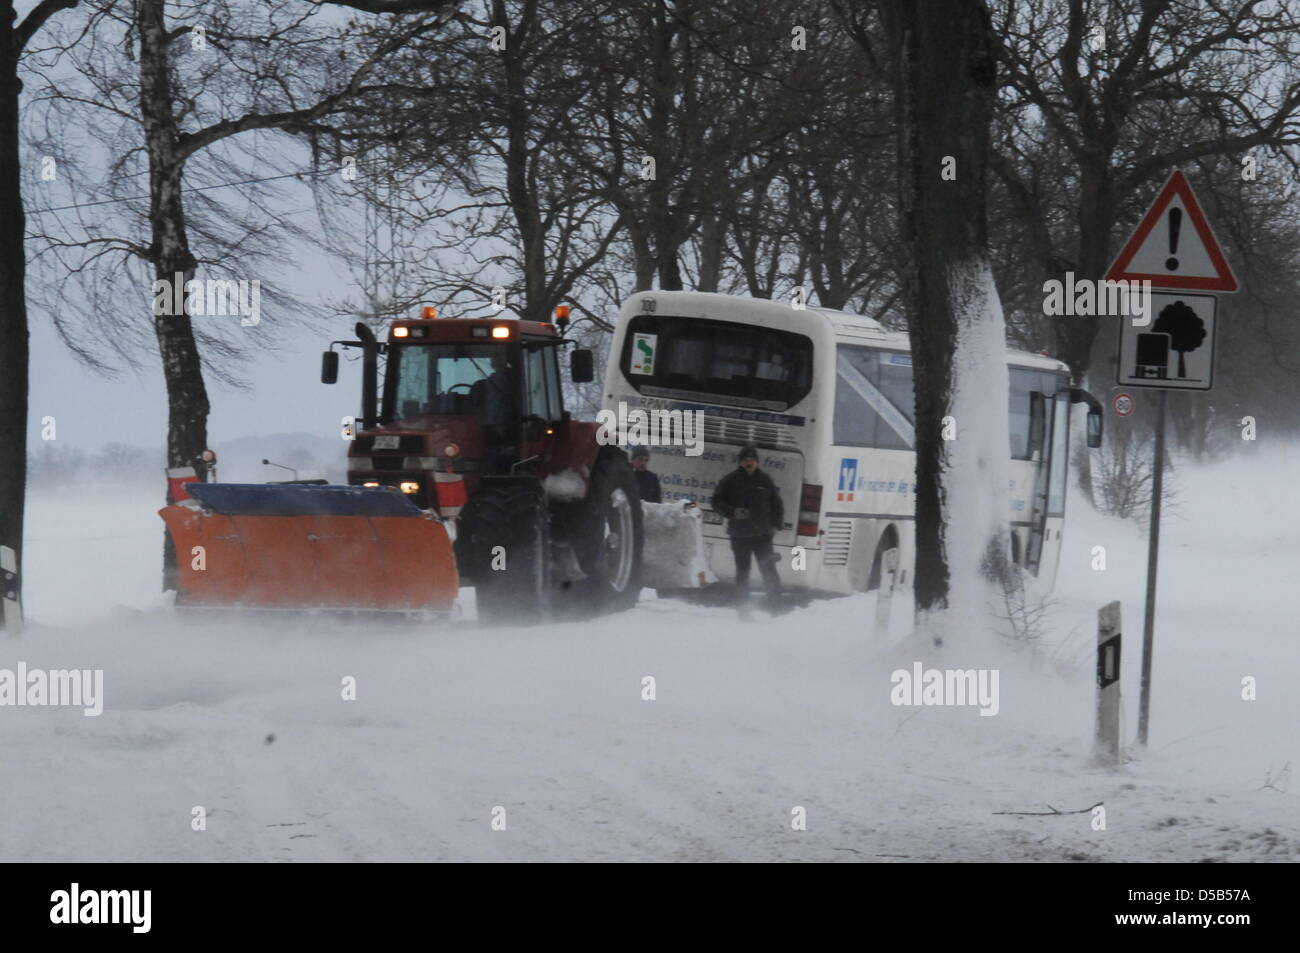 A coach has drifted off the road and is oulled by a tractor near Bergen on the island Ruegen, Germany, 09 January 2010. The low 'Daisy' caused heavy snowfall and disturbs the traffic. Photo: Andreas Kuestermann  dpa/lmv/lno Stock Photo